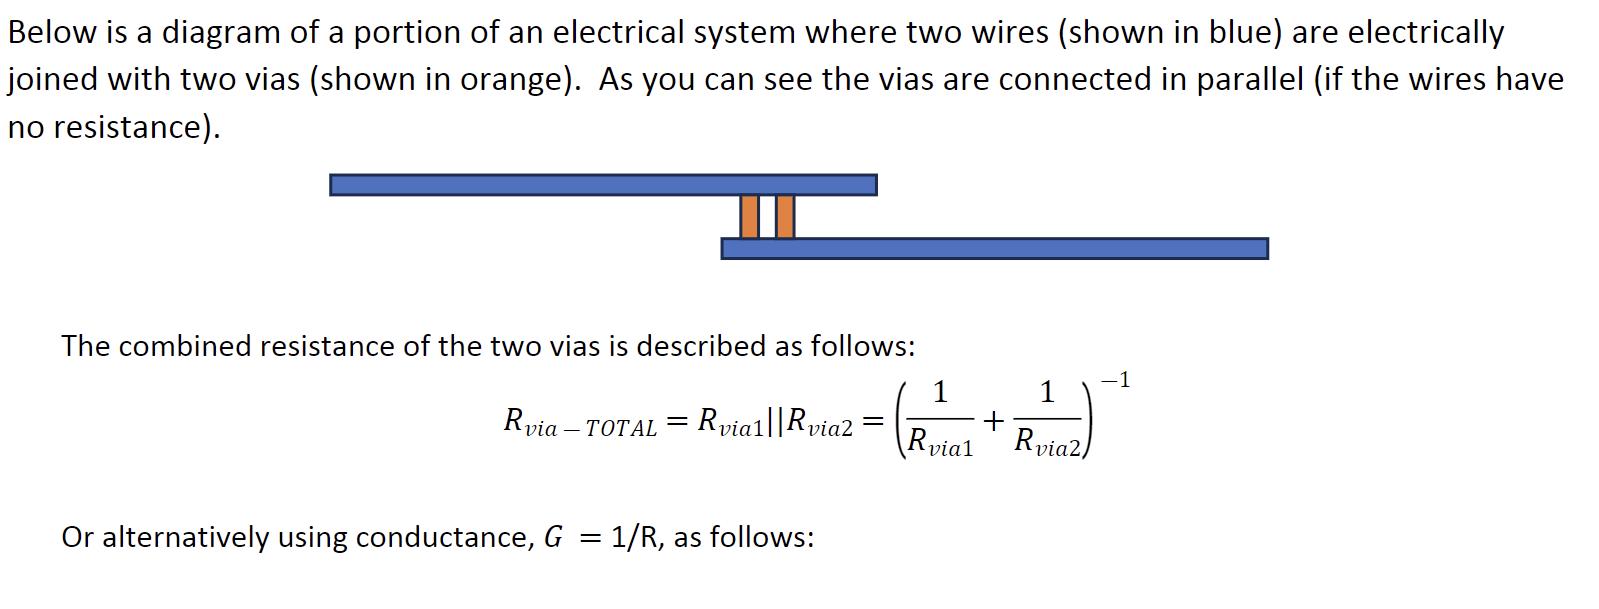 Below is a diagram of a portion of an electrical system where two wires (shown in blue) are electrically